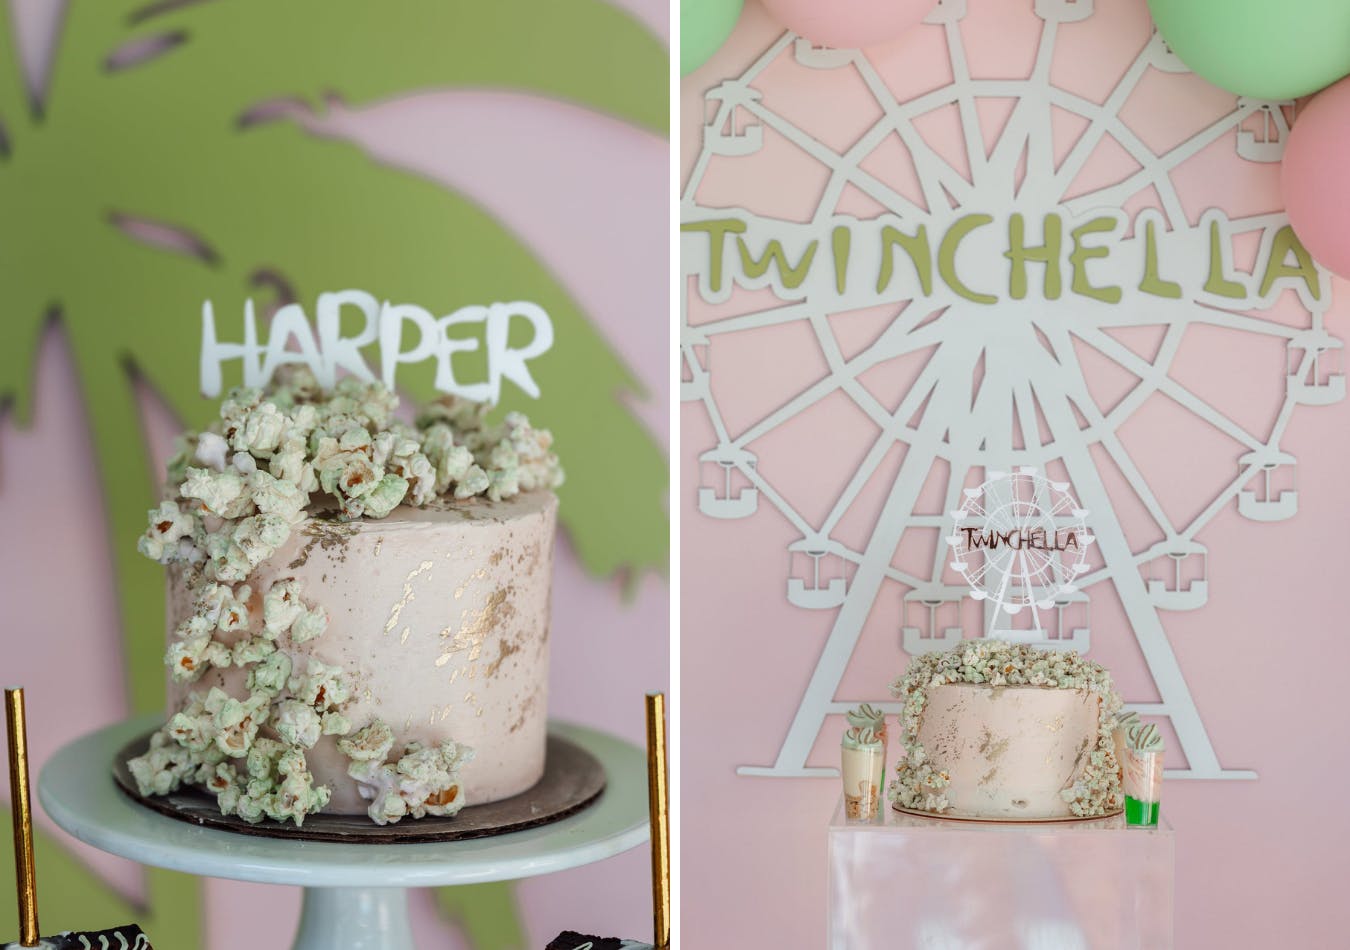 Pink cake covered in white chocolate popcorn at Twinchella-themed kids' party | PartySlate